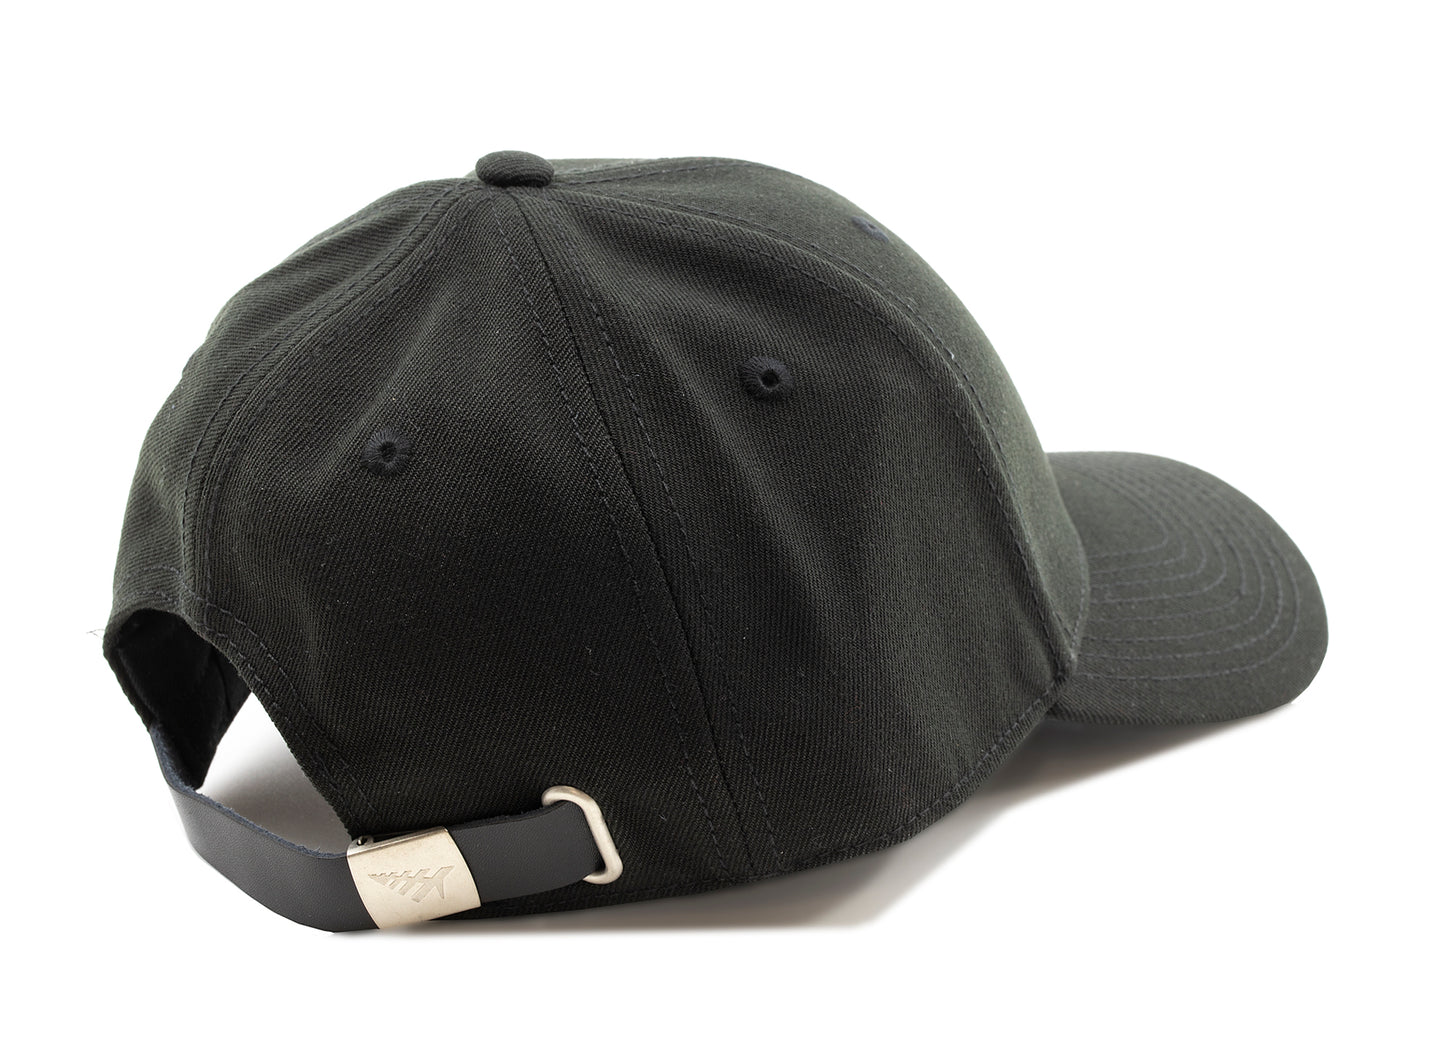 Paper Planes Icon II Dad Hat in Black